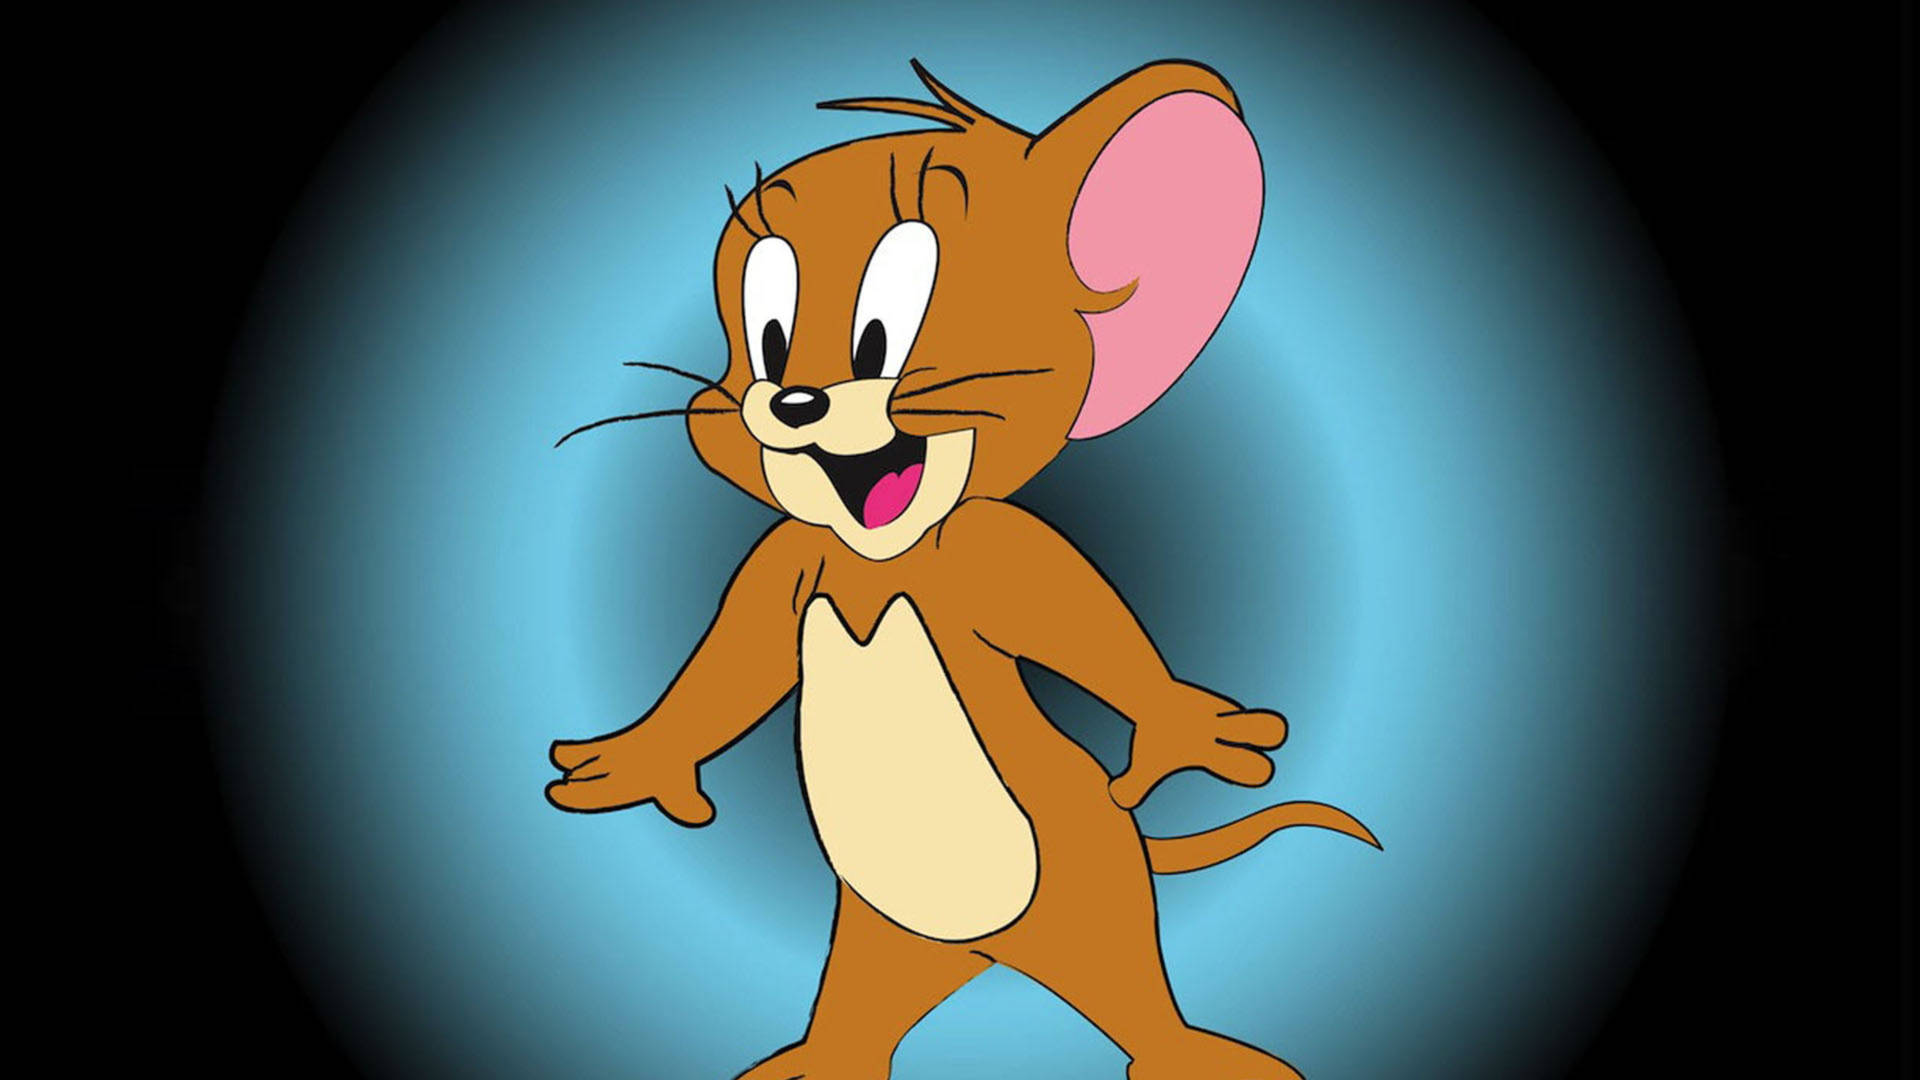 Free Tom And Jerry Wallpaper Downloads, [200+] Tom And Jerry Wallpapers for  FREE 